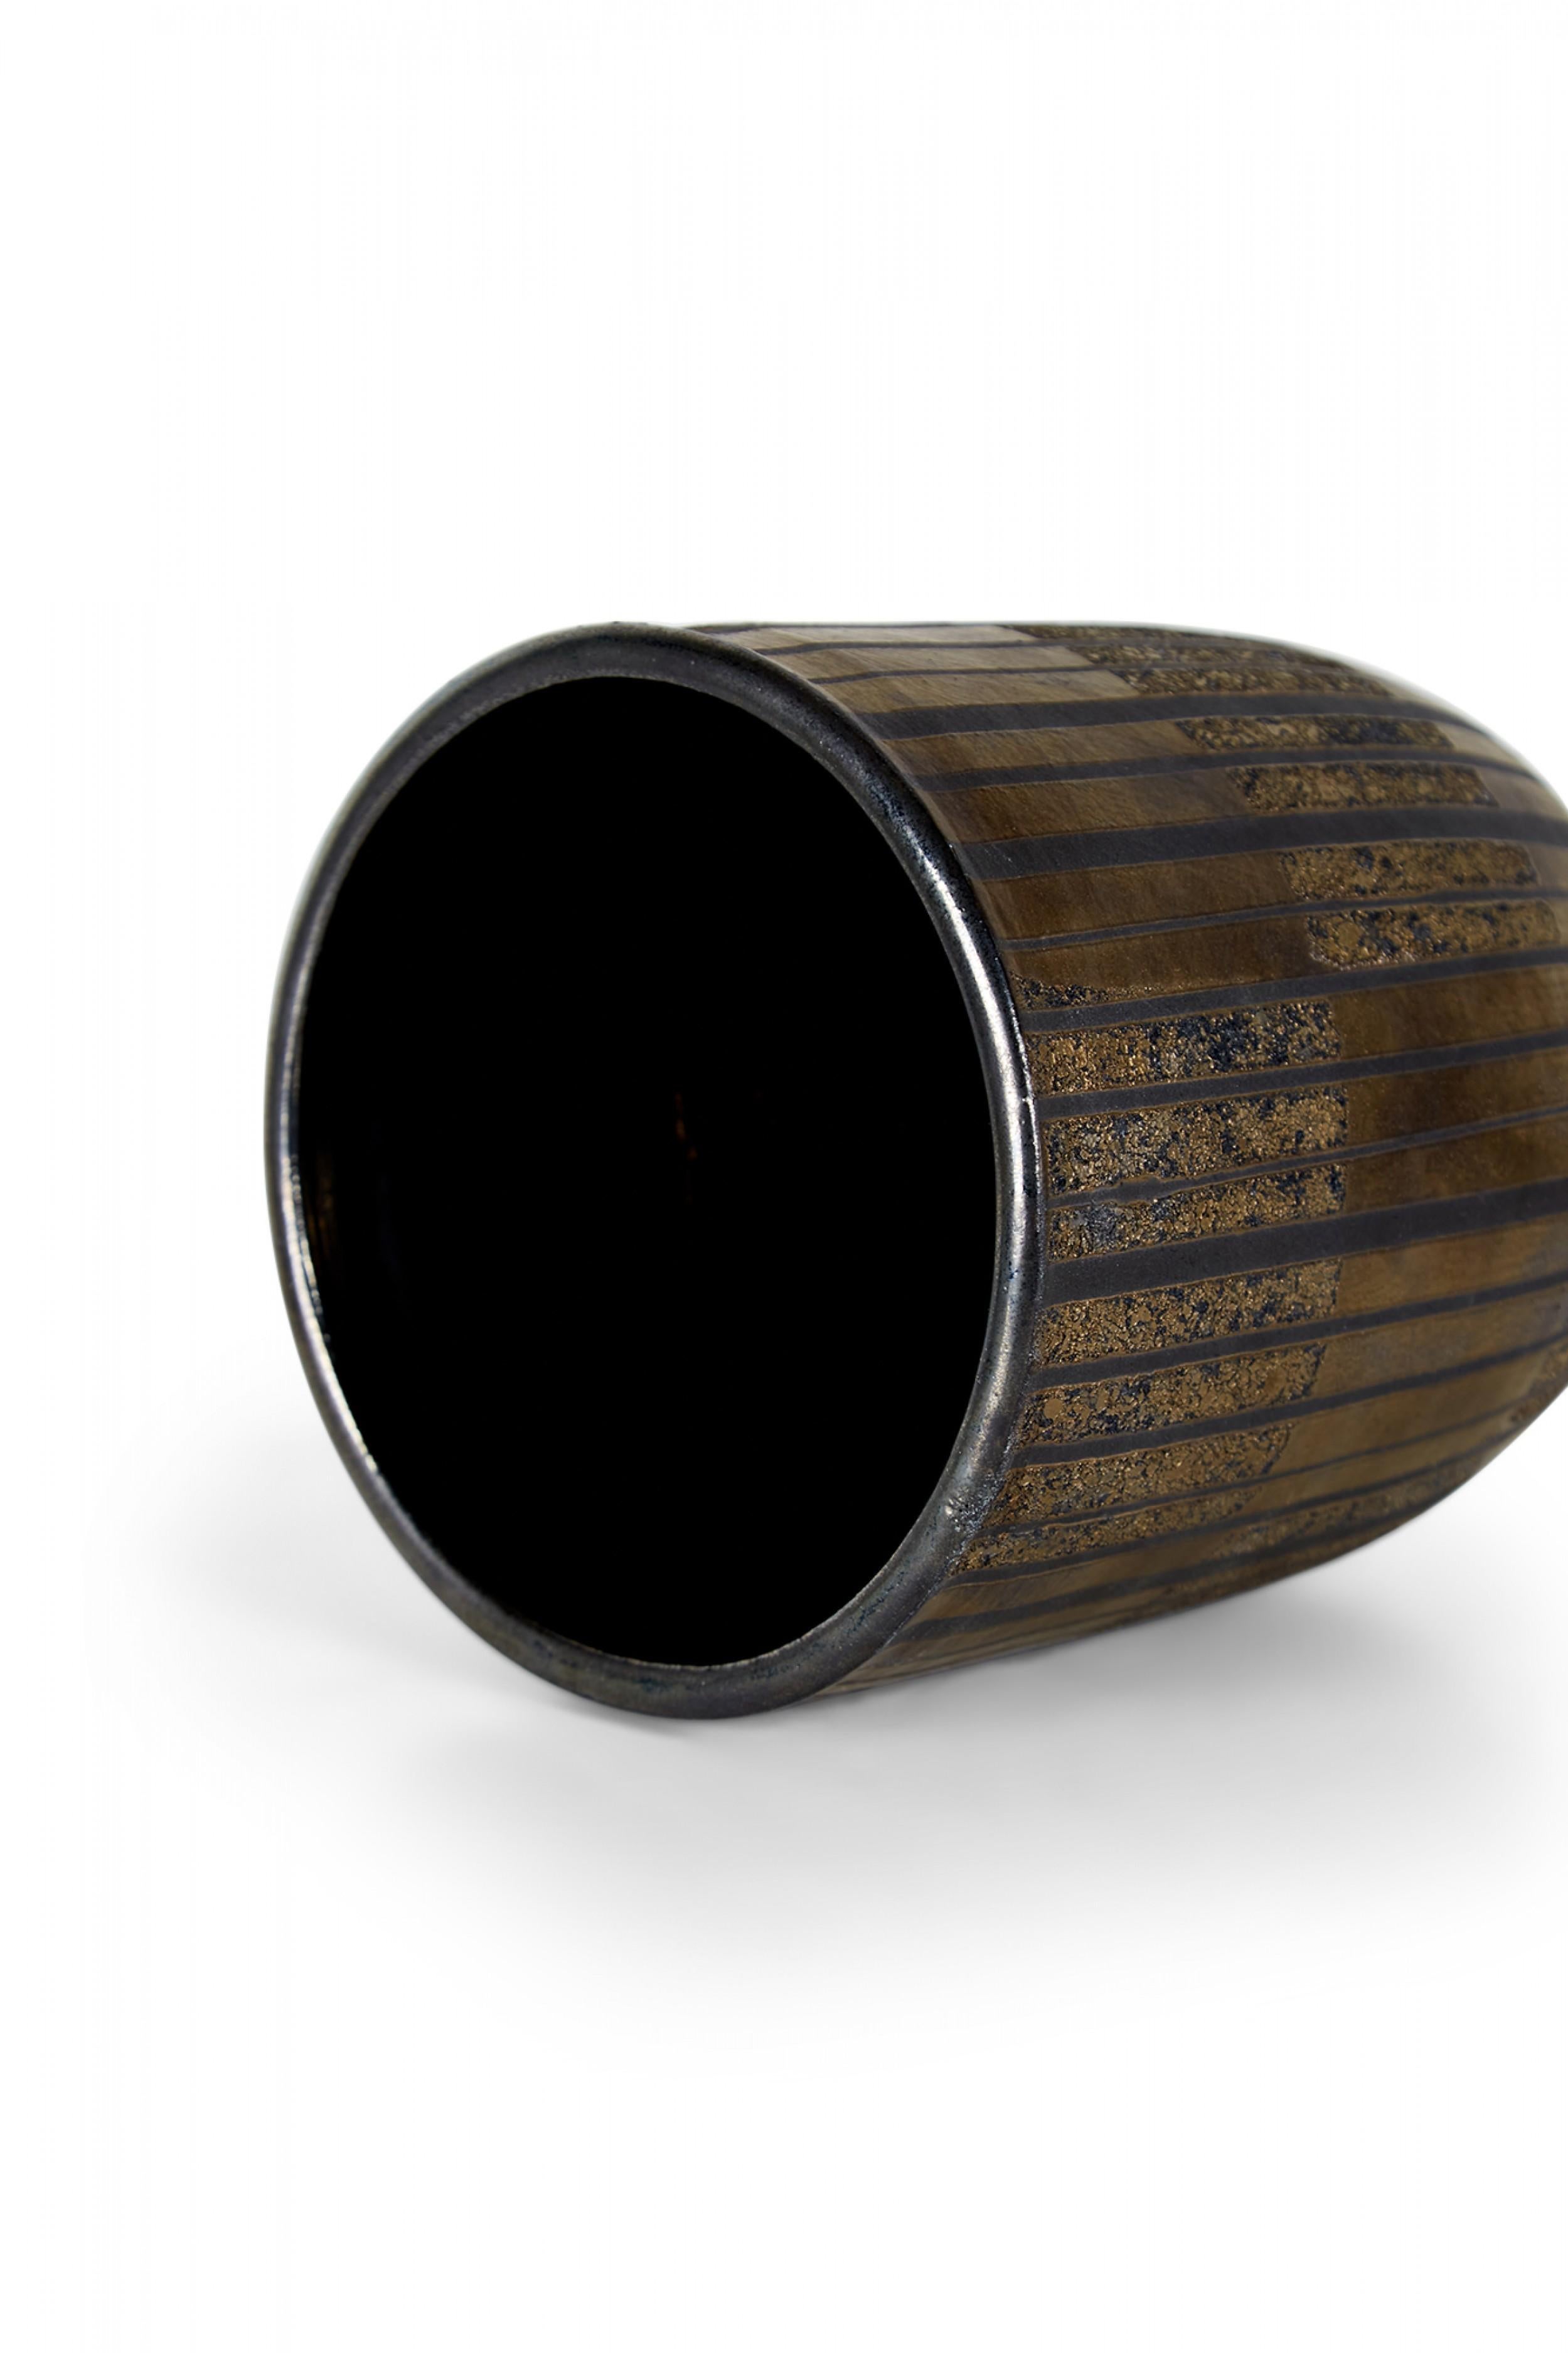 Contemporary thrown clay vase with a cylindrical form with rounded bottom and incised vertical stripes, finished with a metallic bronze and black glaze. (GARY DI PASQUALE) (Companion piece: NWL6271).
 